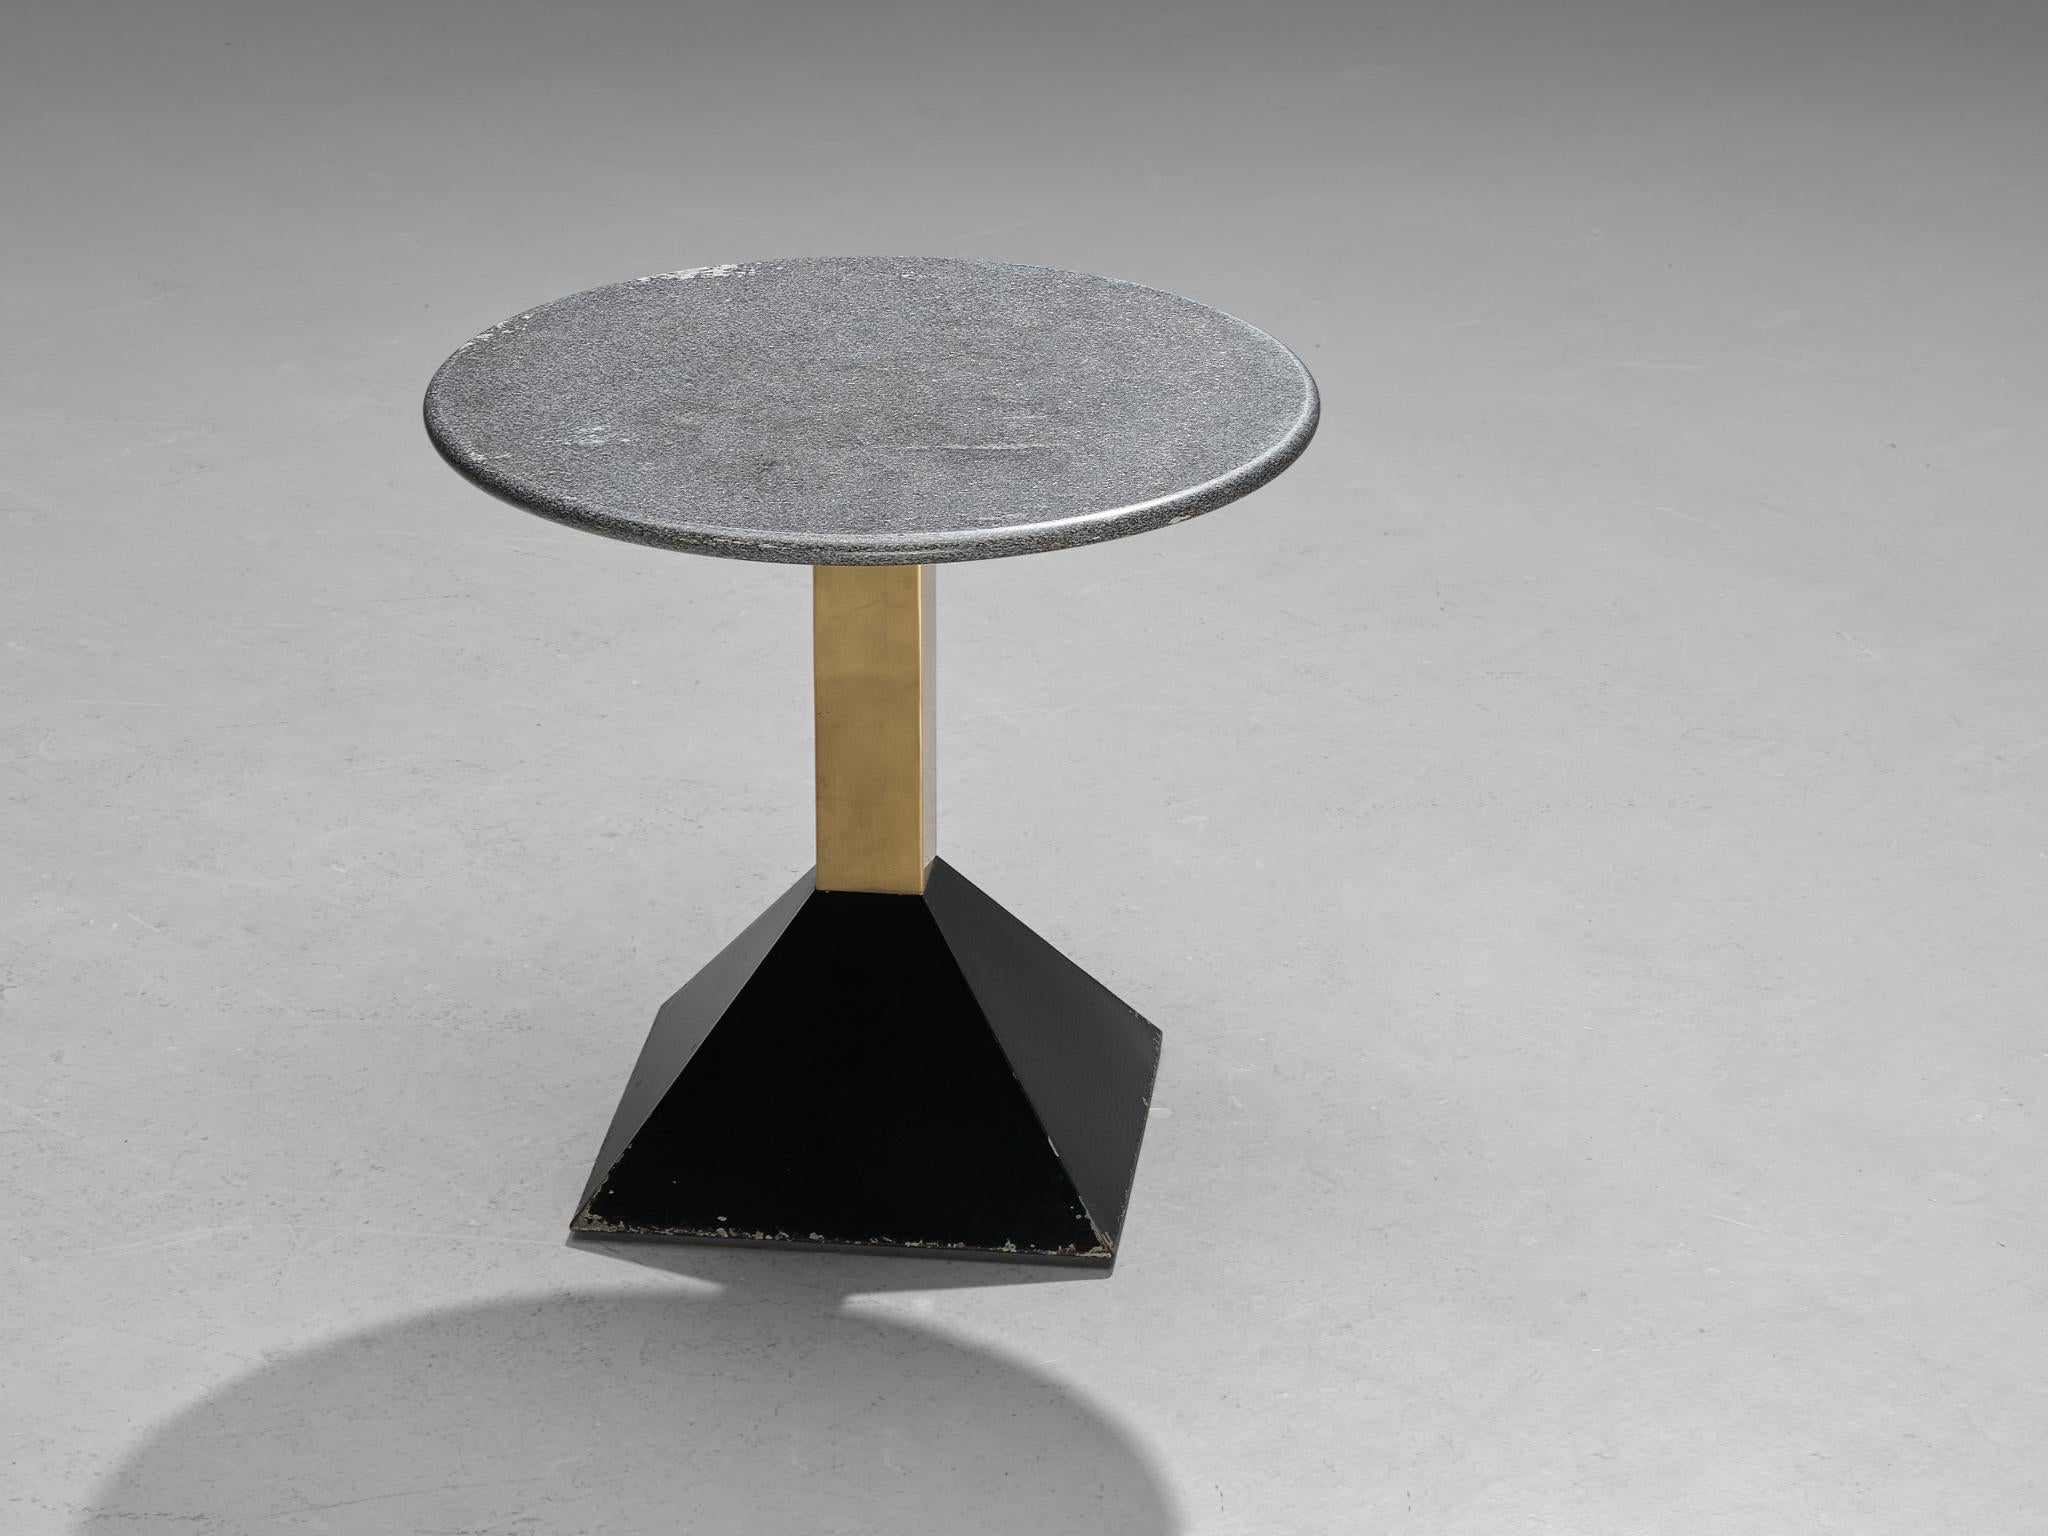 Coffee table, granite, metal, brass, Italy, 1980s

This side table features a grey tabletop in round format. The granite shows a vivid surface. A brass pedestal ends in a black trapezoid base in black metal. The composition of textures and formats,